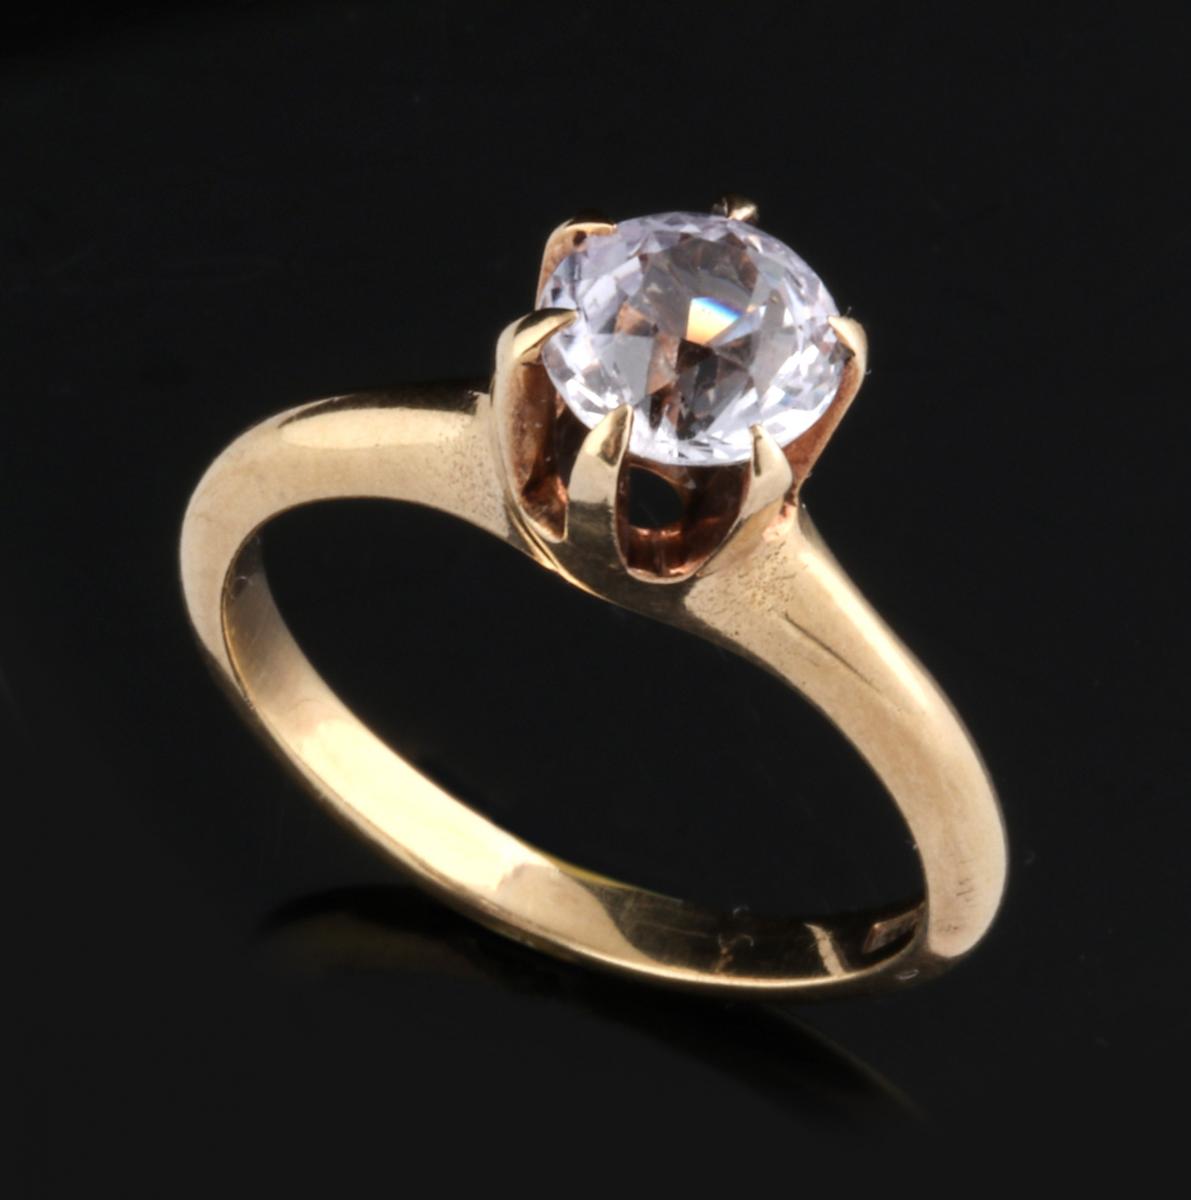 A 14K GOLD AND WHITE SAPPHIRE RING